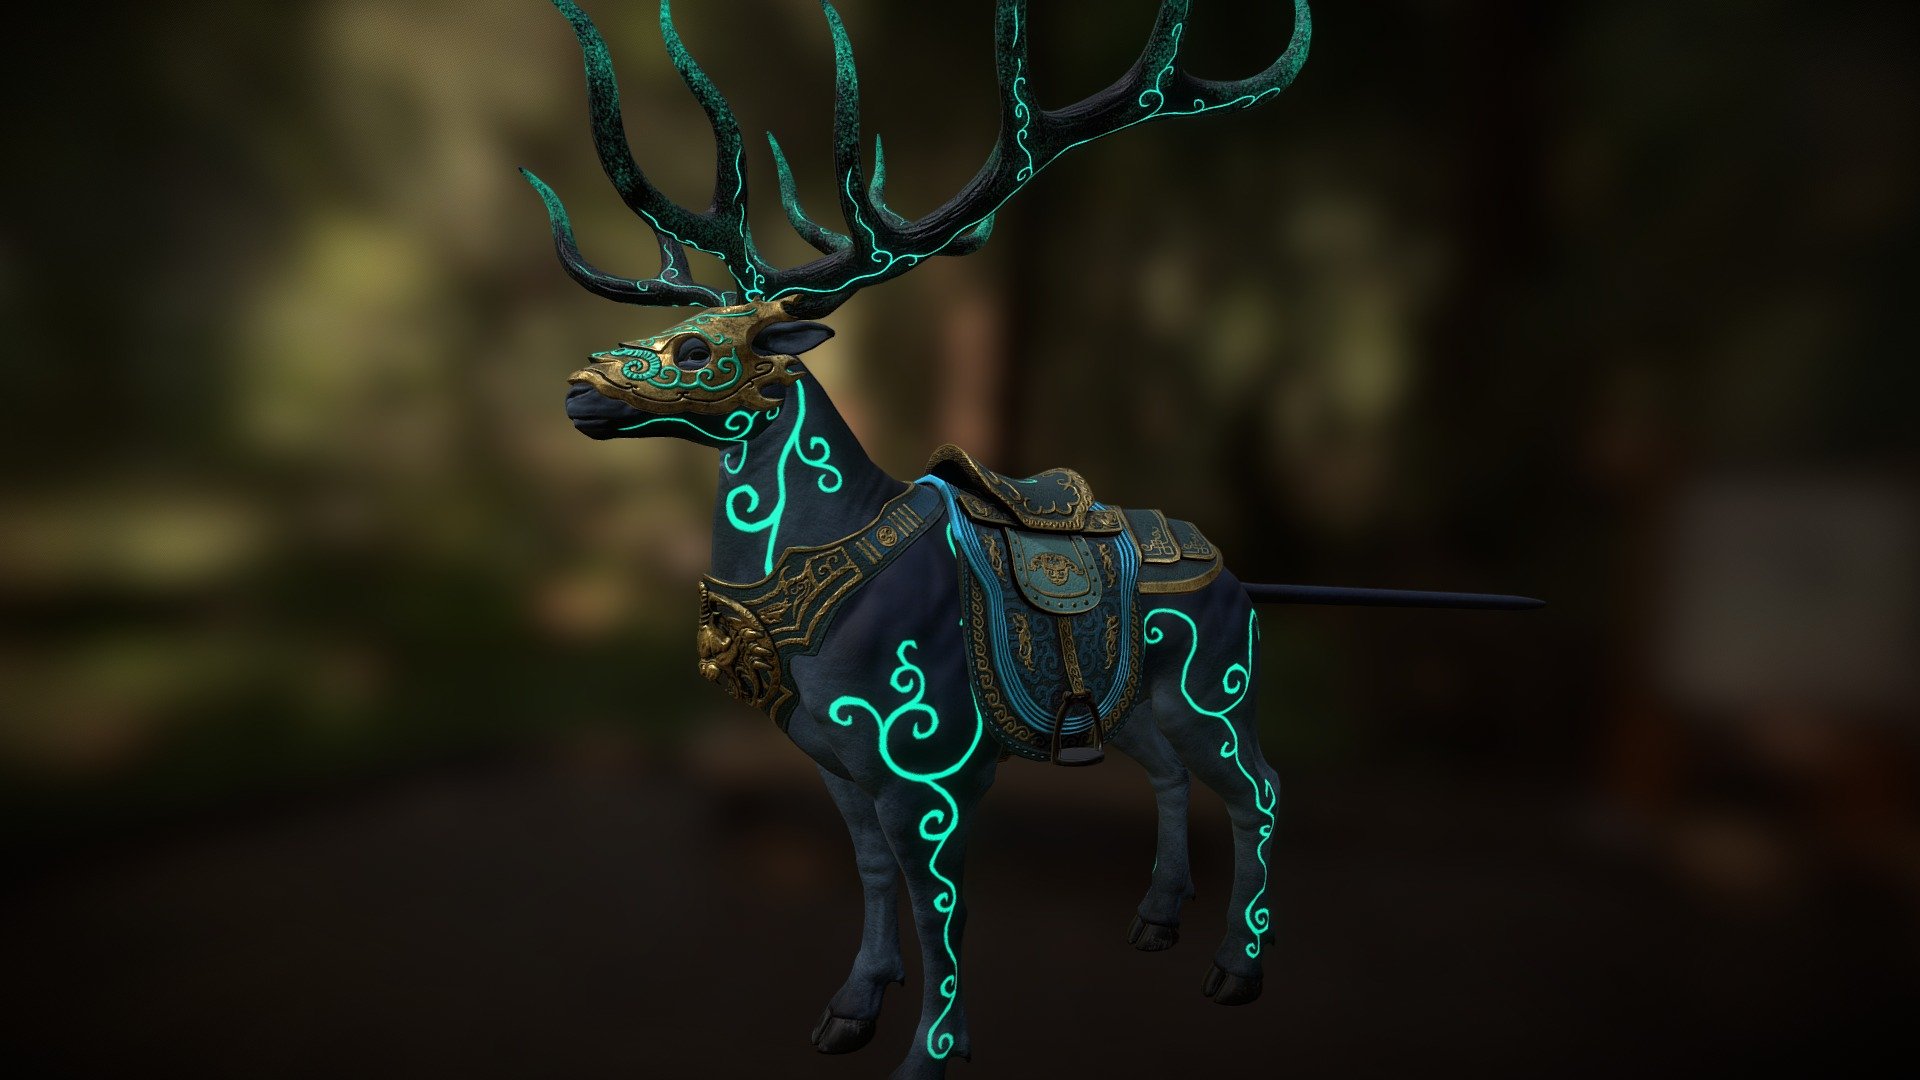 And here is another game ready deer i made from one project. The tail should have been a peacock like tail but it never made to that part.
Hope you guys like it 3d model